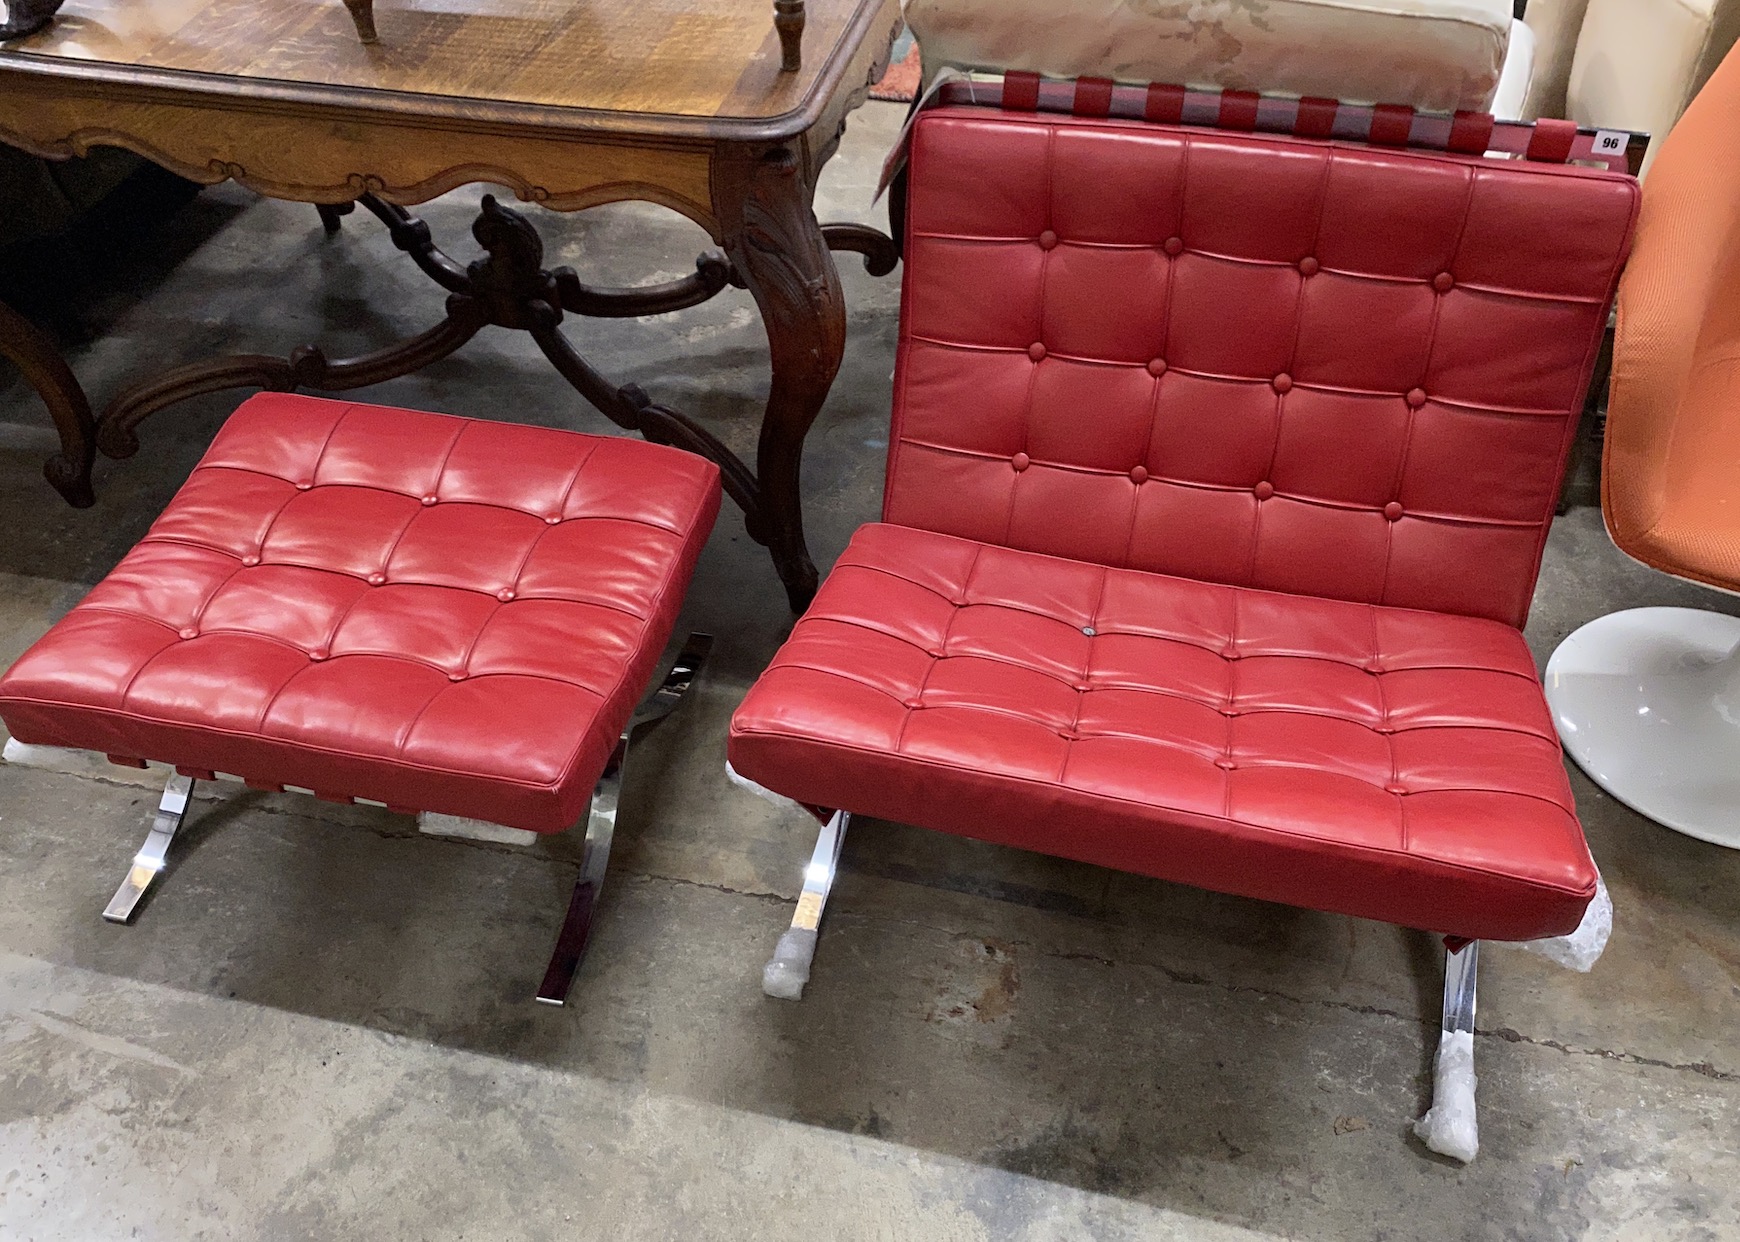 A Knoll Studio Barcelona style red leather and chrome chair, width 75cm, depth 75cm, height 74cm and footstool                                                                                                              